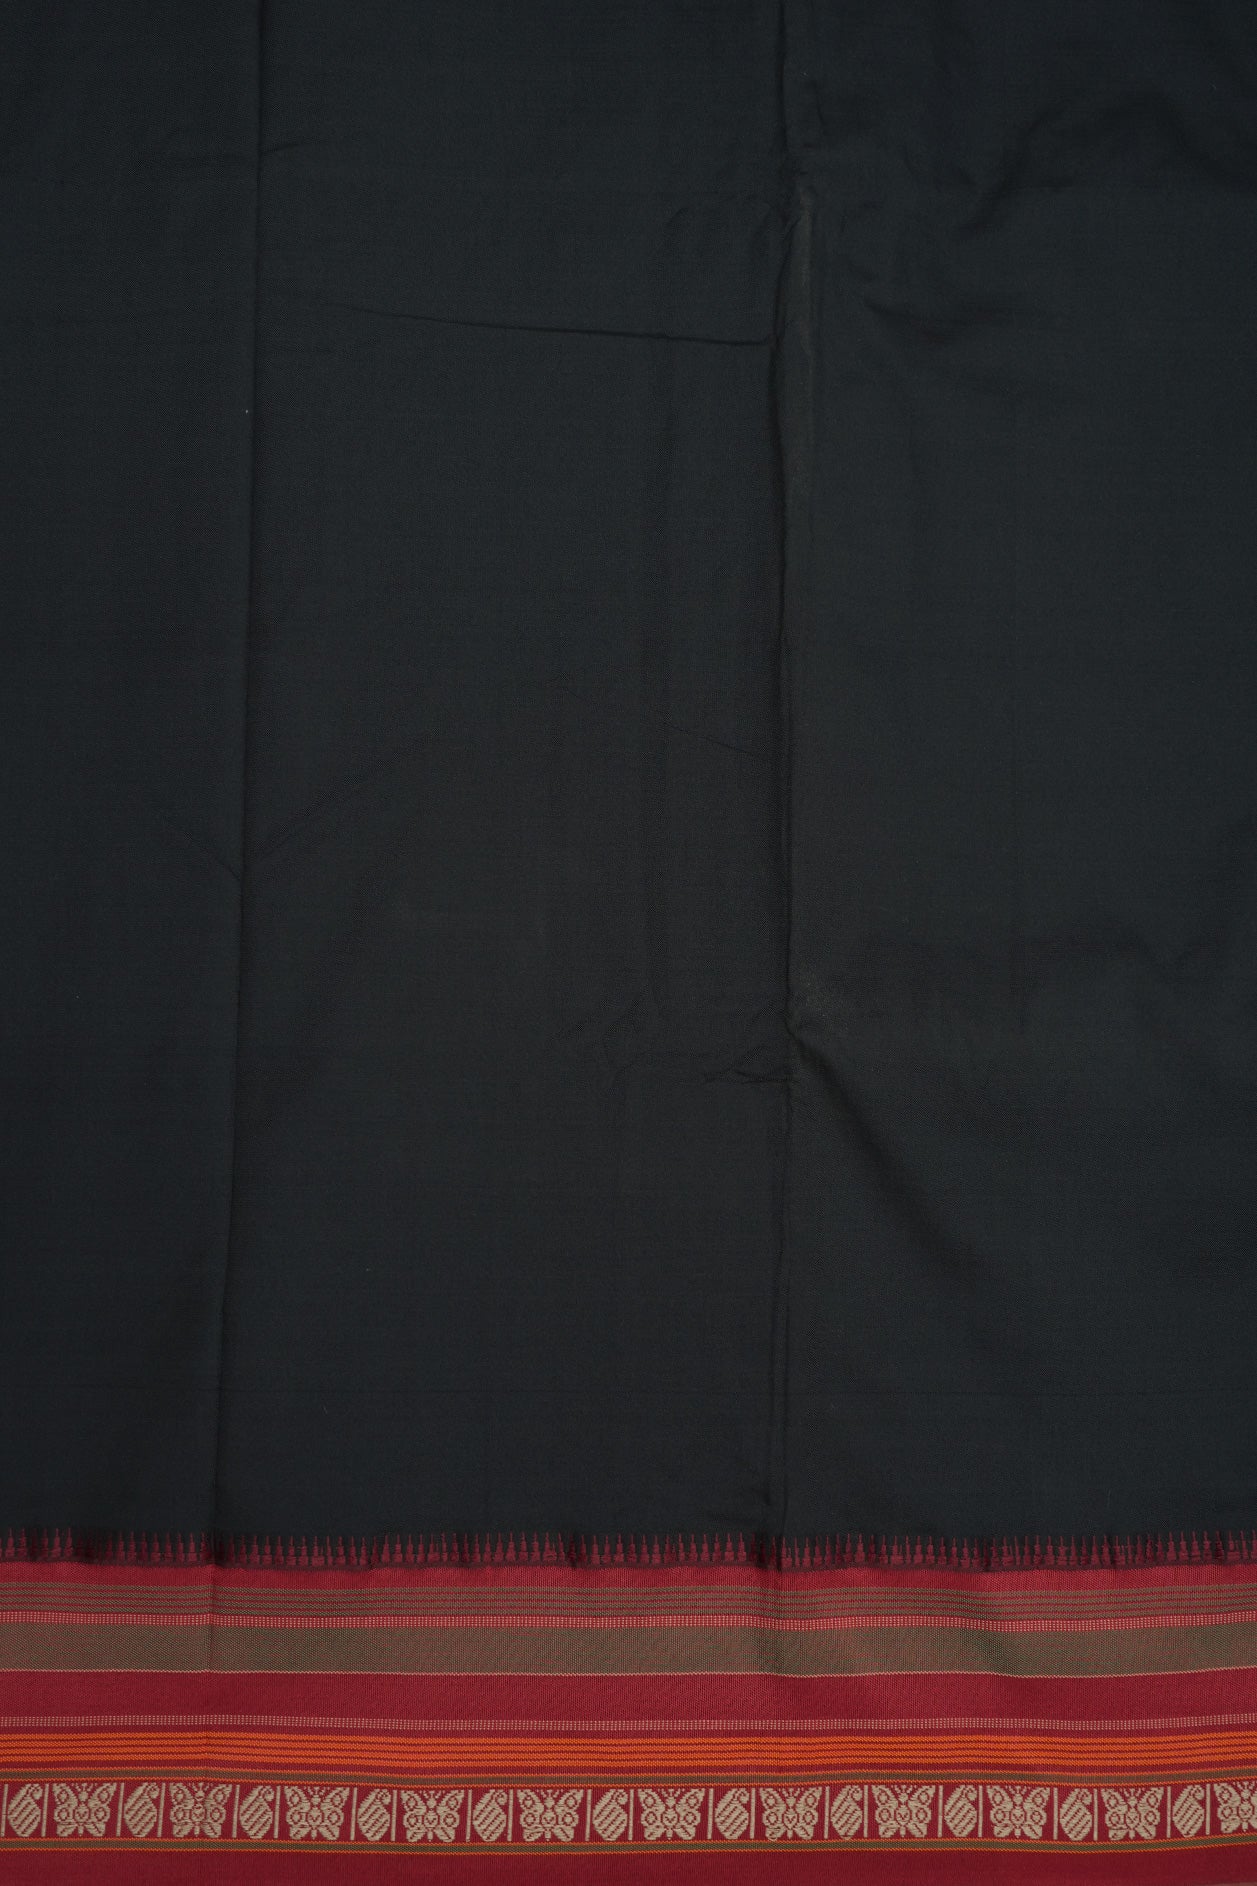 Butterfly and Paisley Threadwork  Border With Plain Black Dharwad Cotton Saree